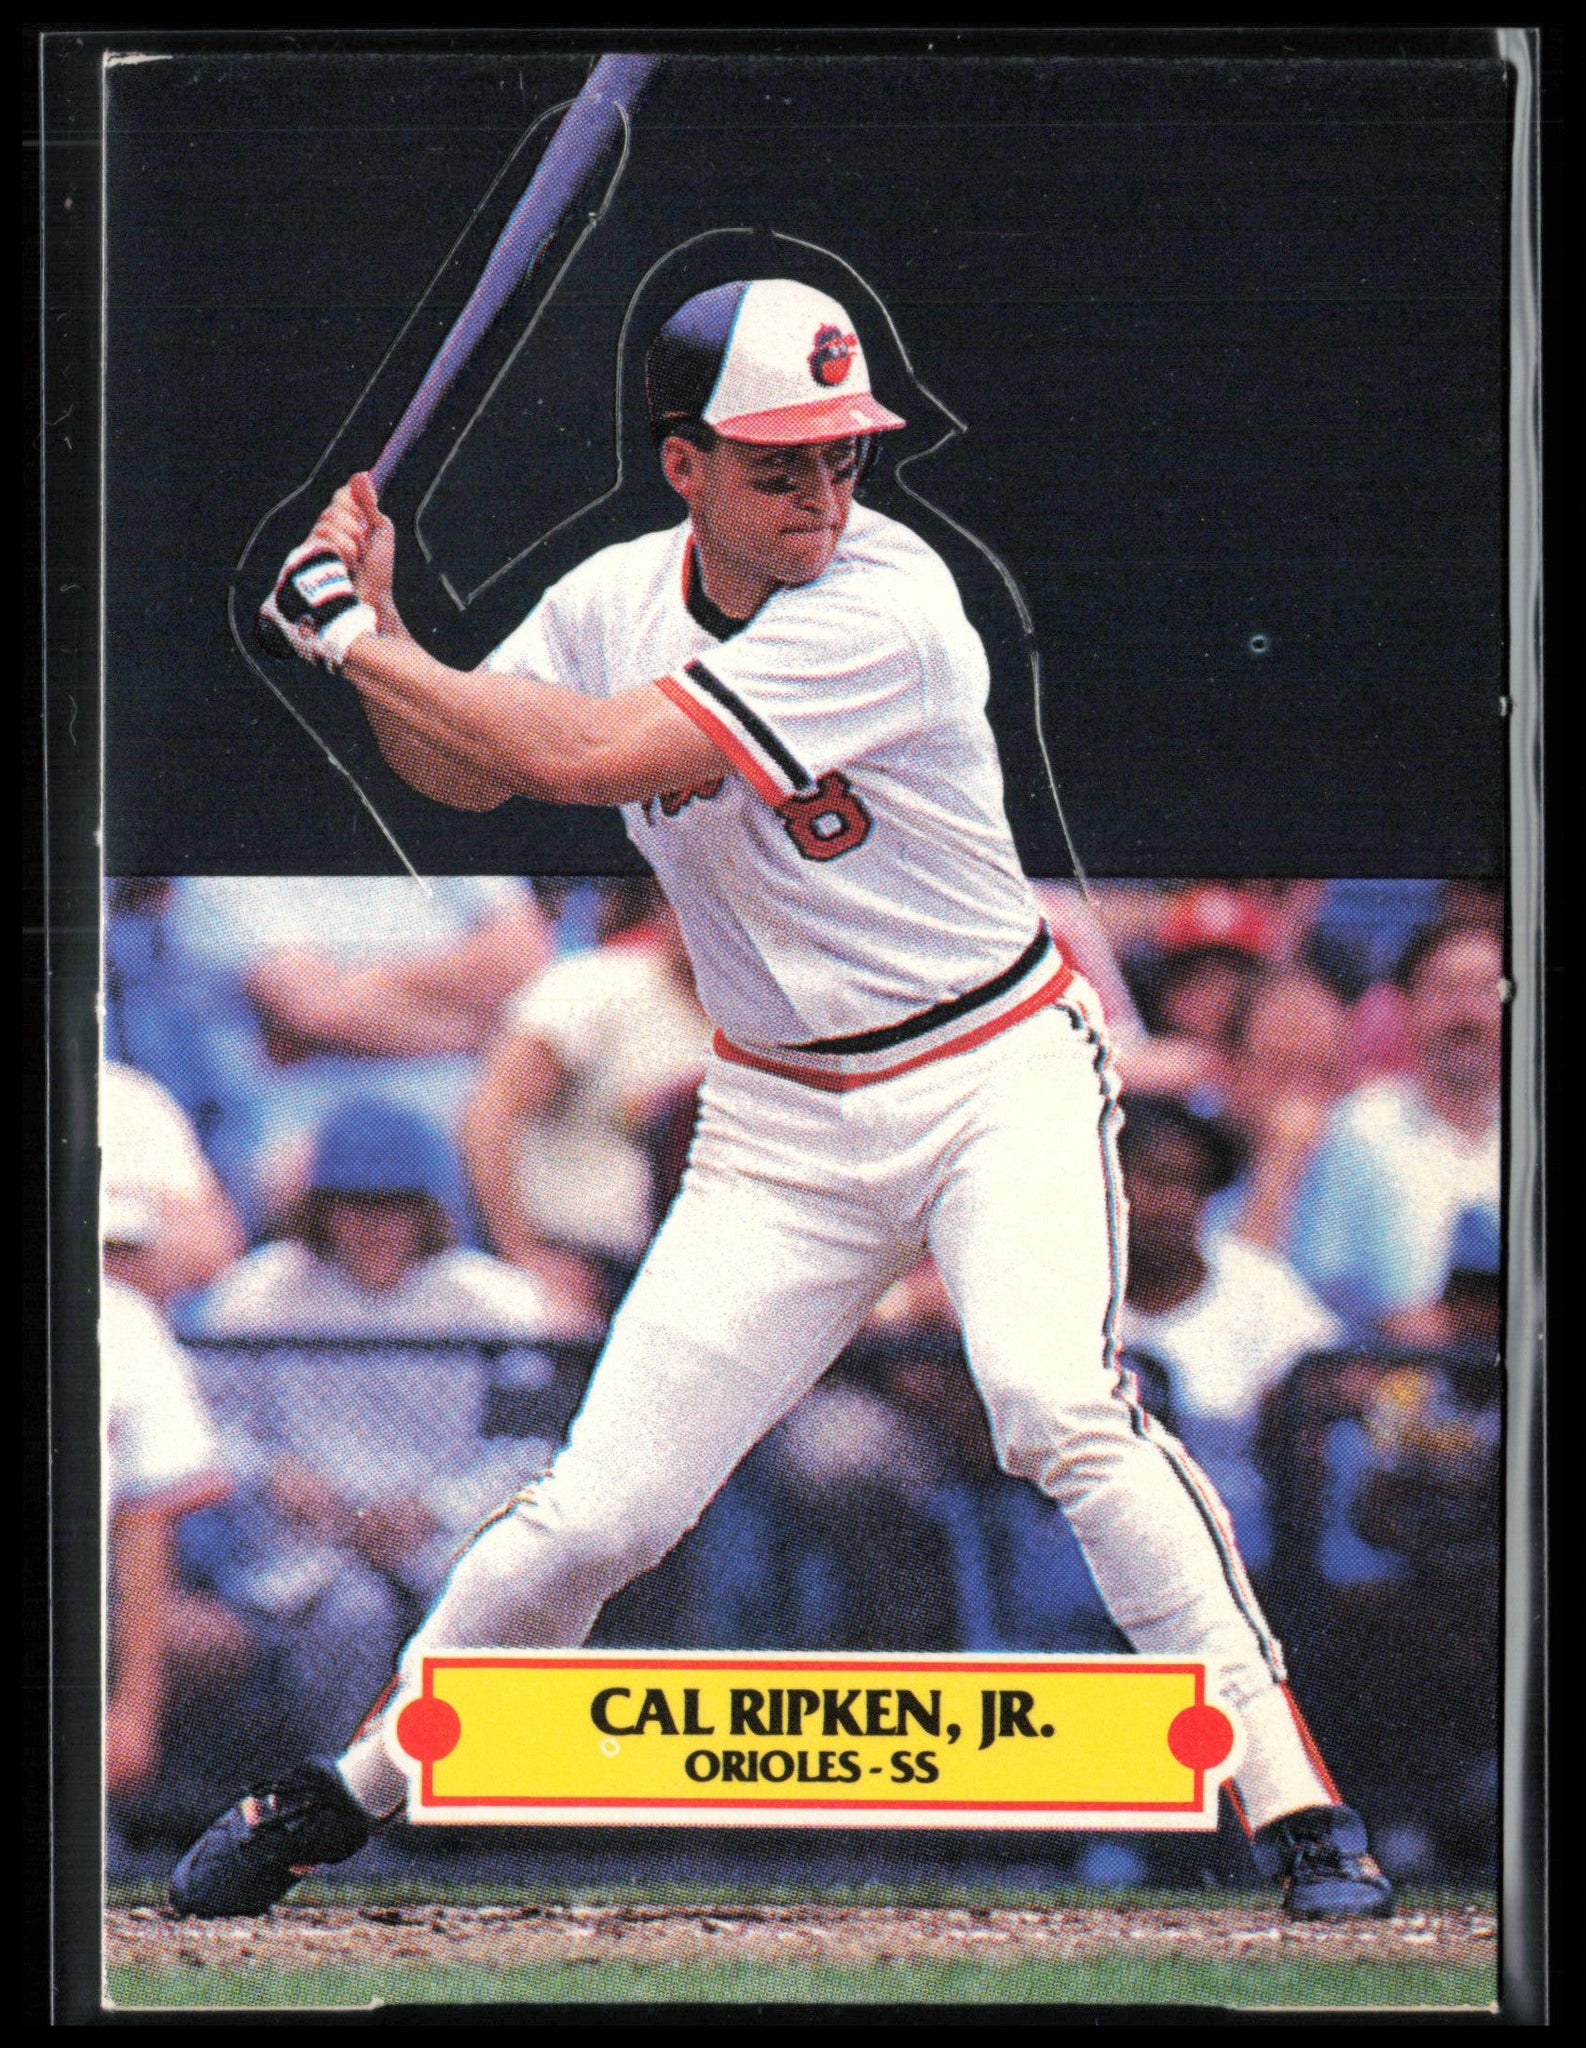 Out at Home by Cal Ripken Jr.